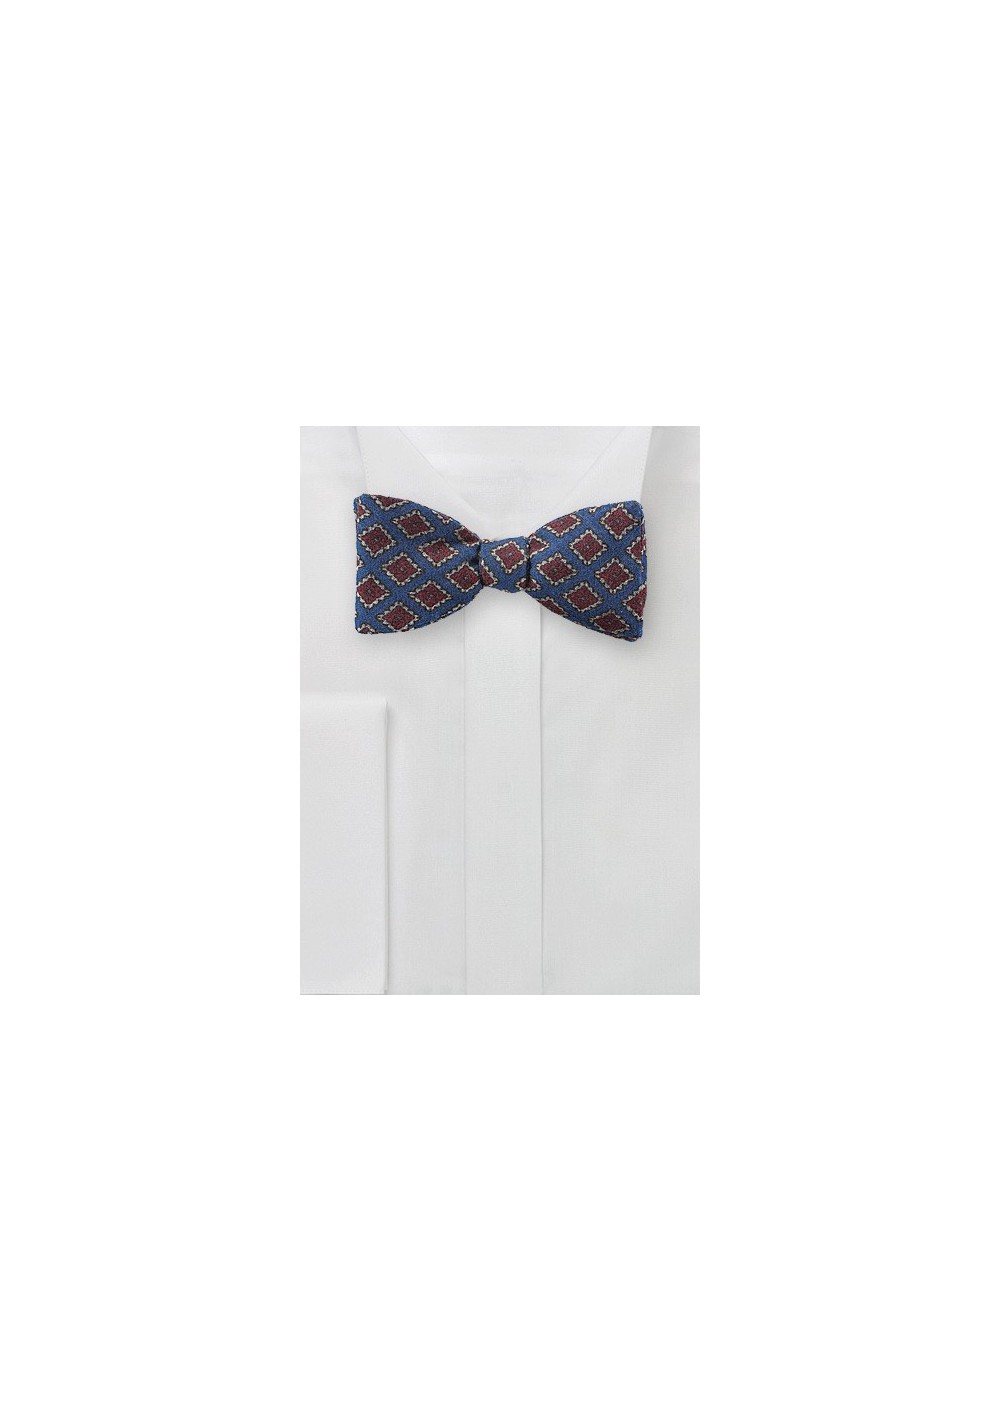 Diamond Check Bow Tie in Blue and Red